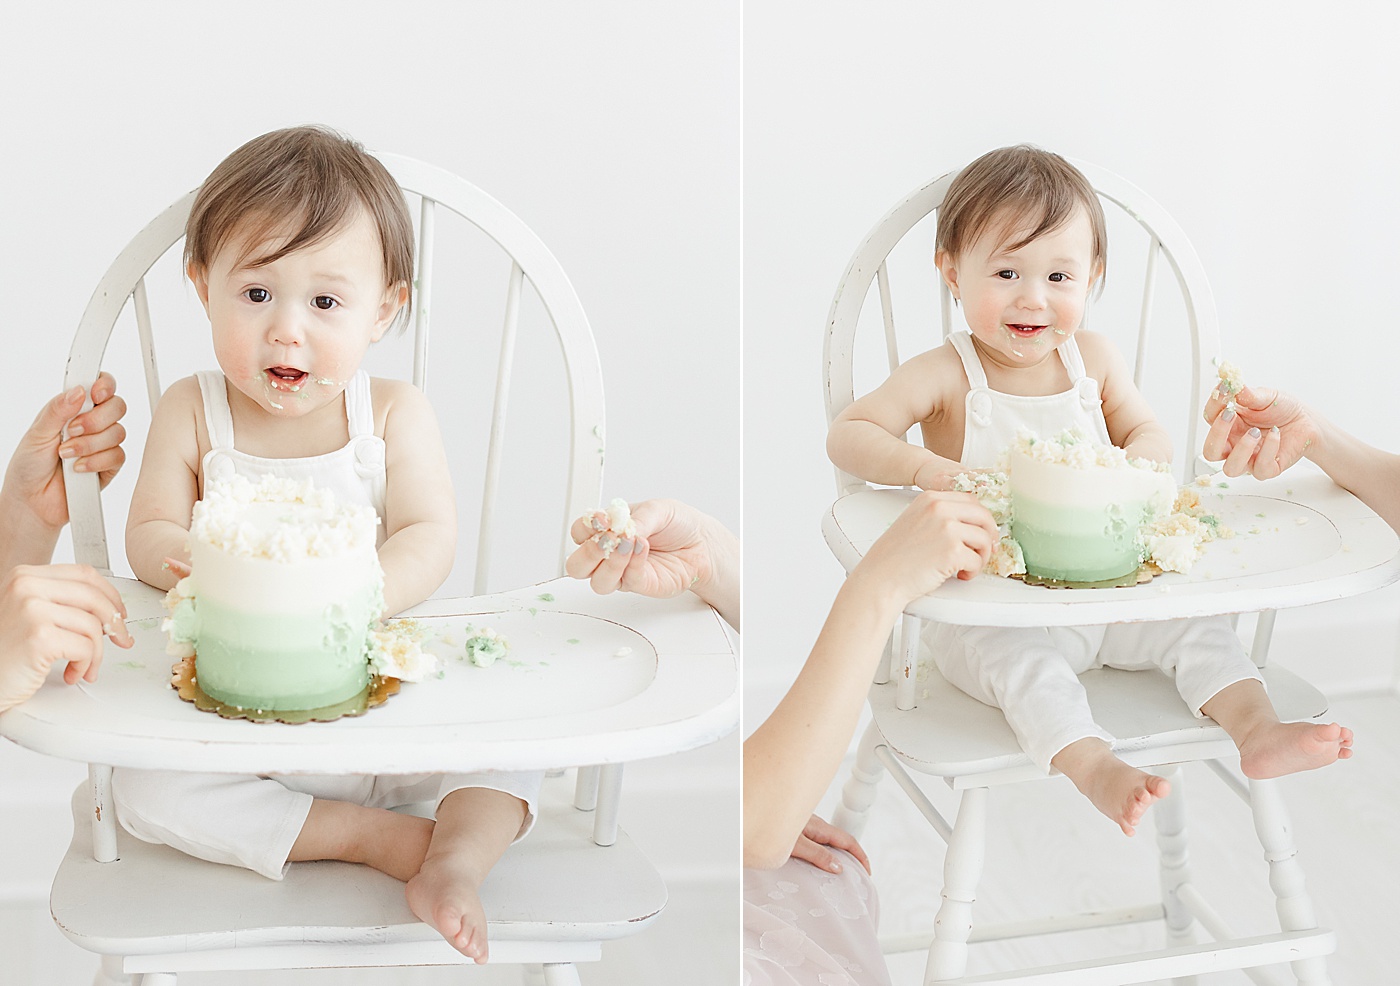 Cake smash at first birthday session in studio in Westport, CT | Kristin Wood Photography